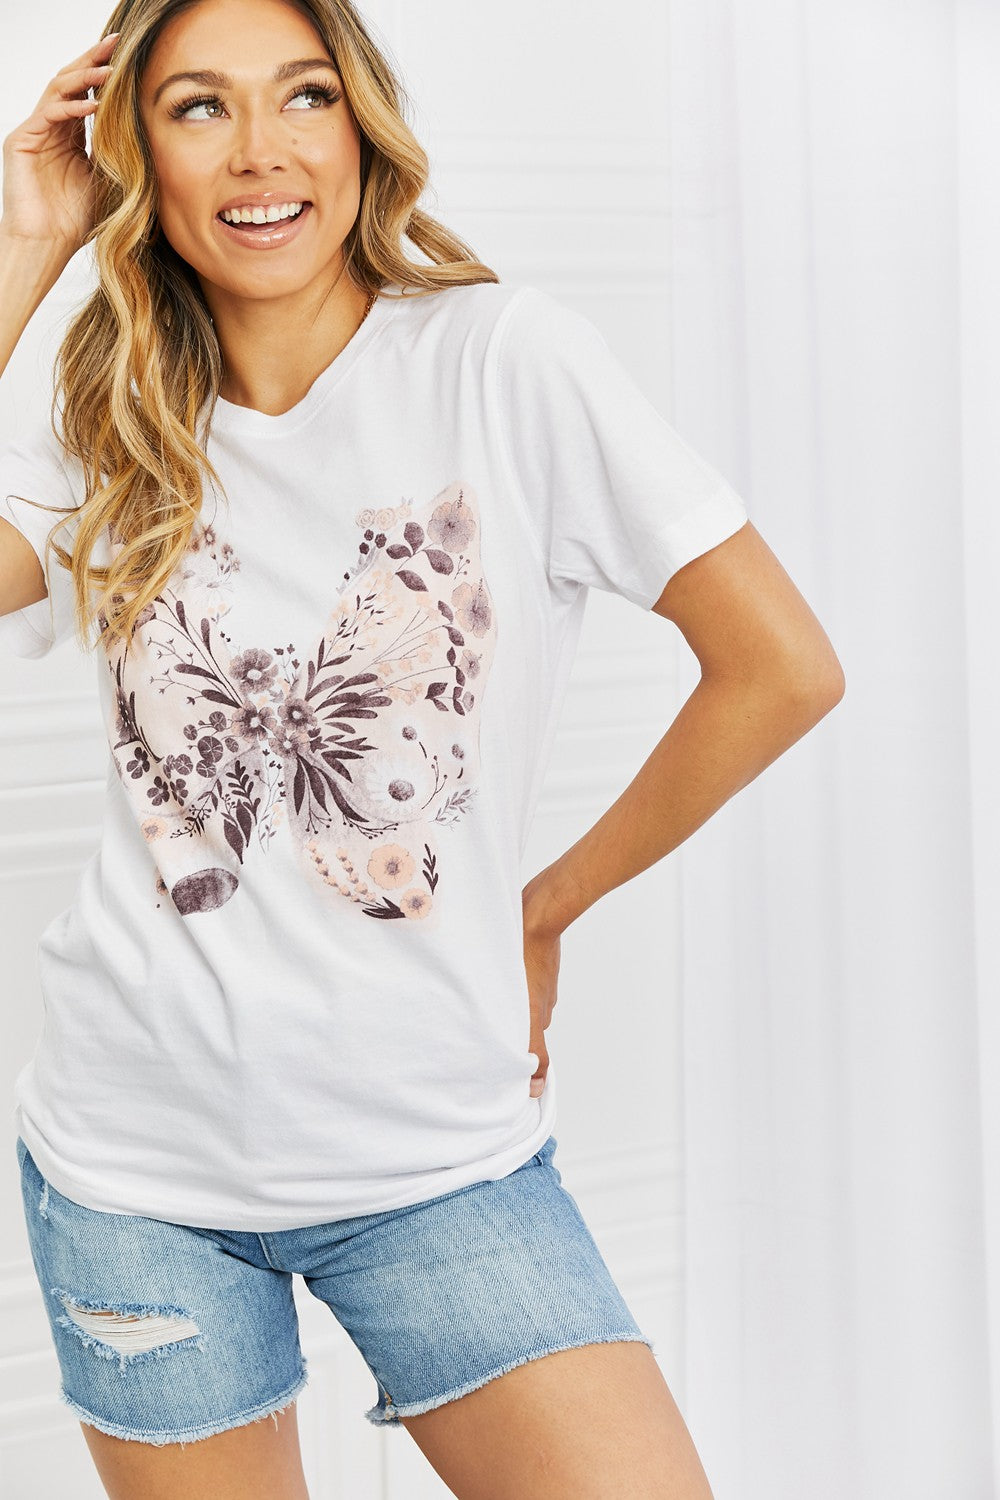 You Give Me Butterflies Graphic Tee - Copper + Rose